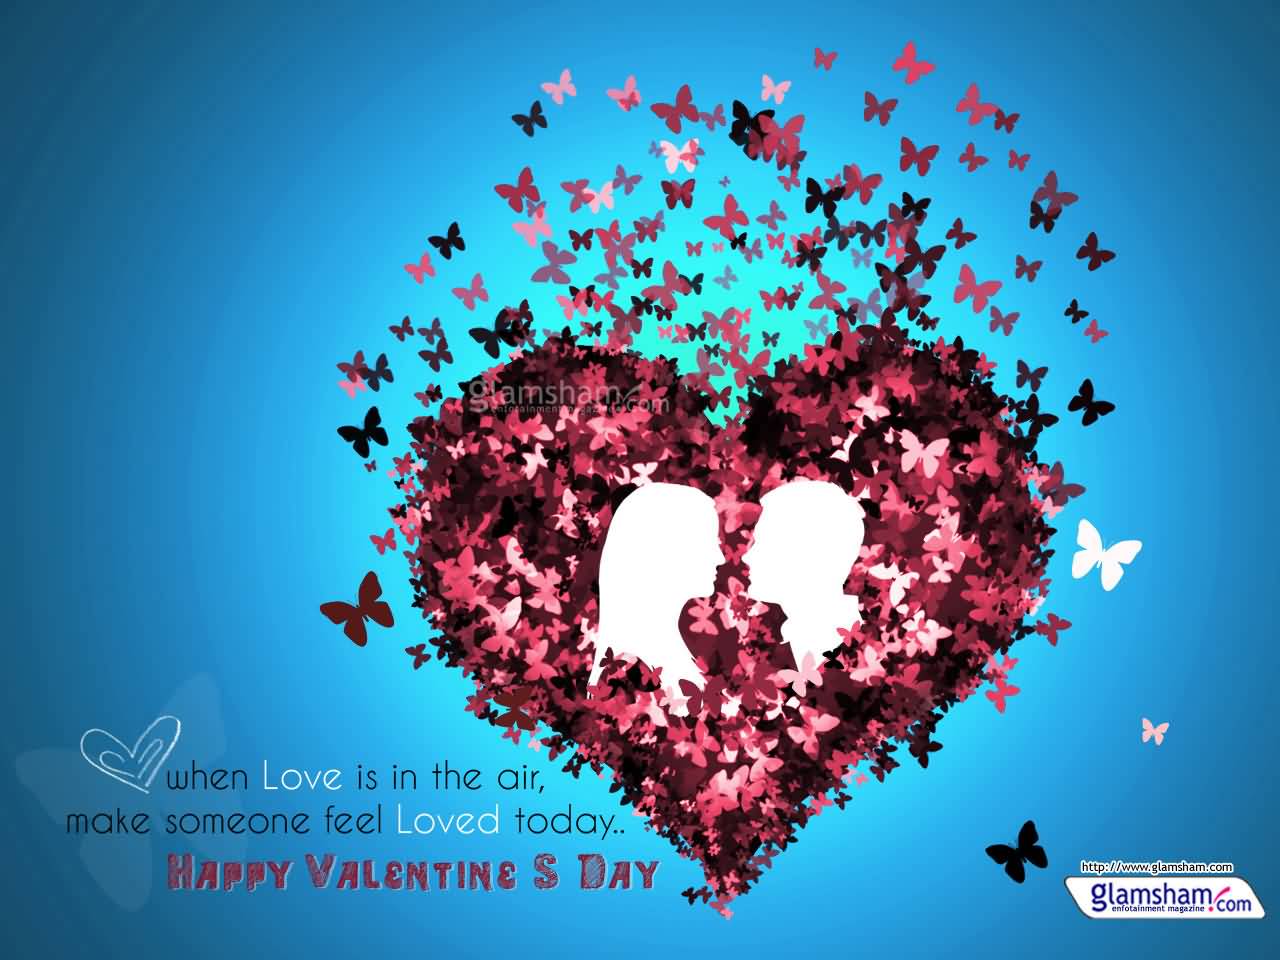 When Love Is In The Air, Make Someone Feel Loved Today Happy Valentine’s Day Wallpaper1280 x 960